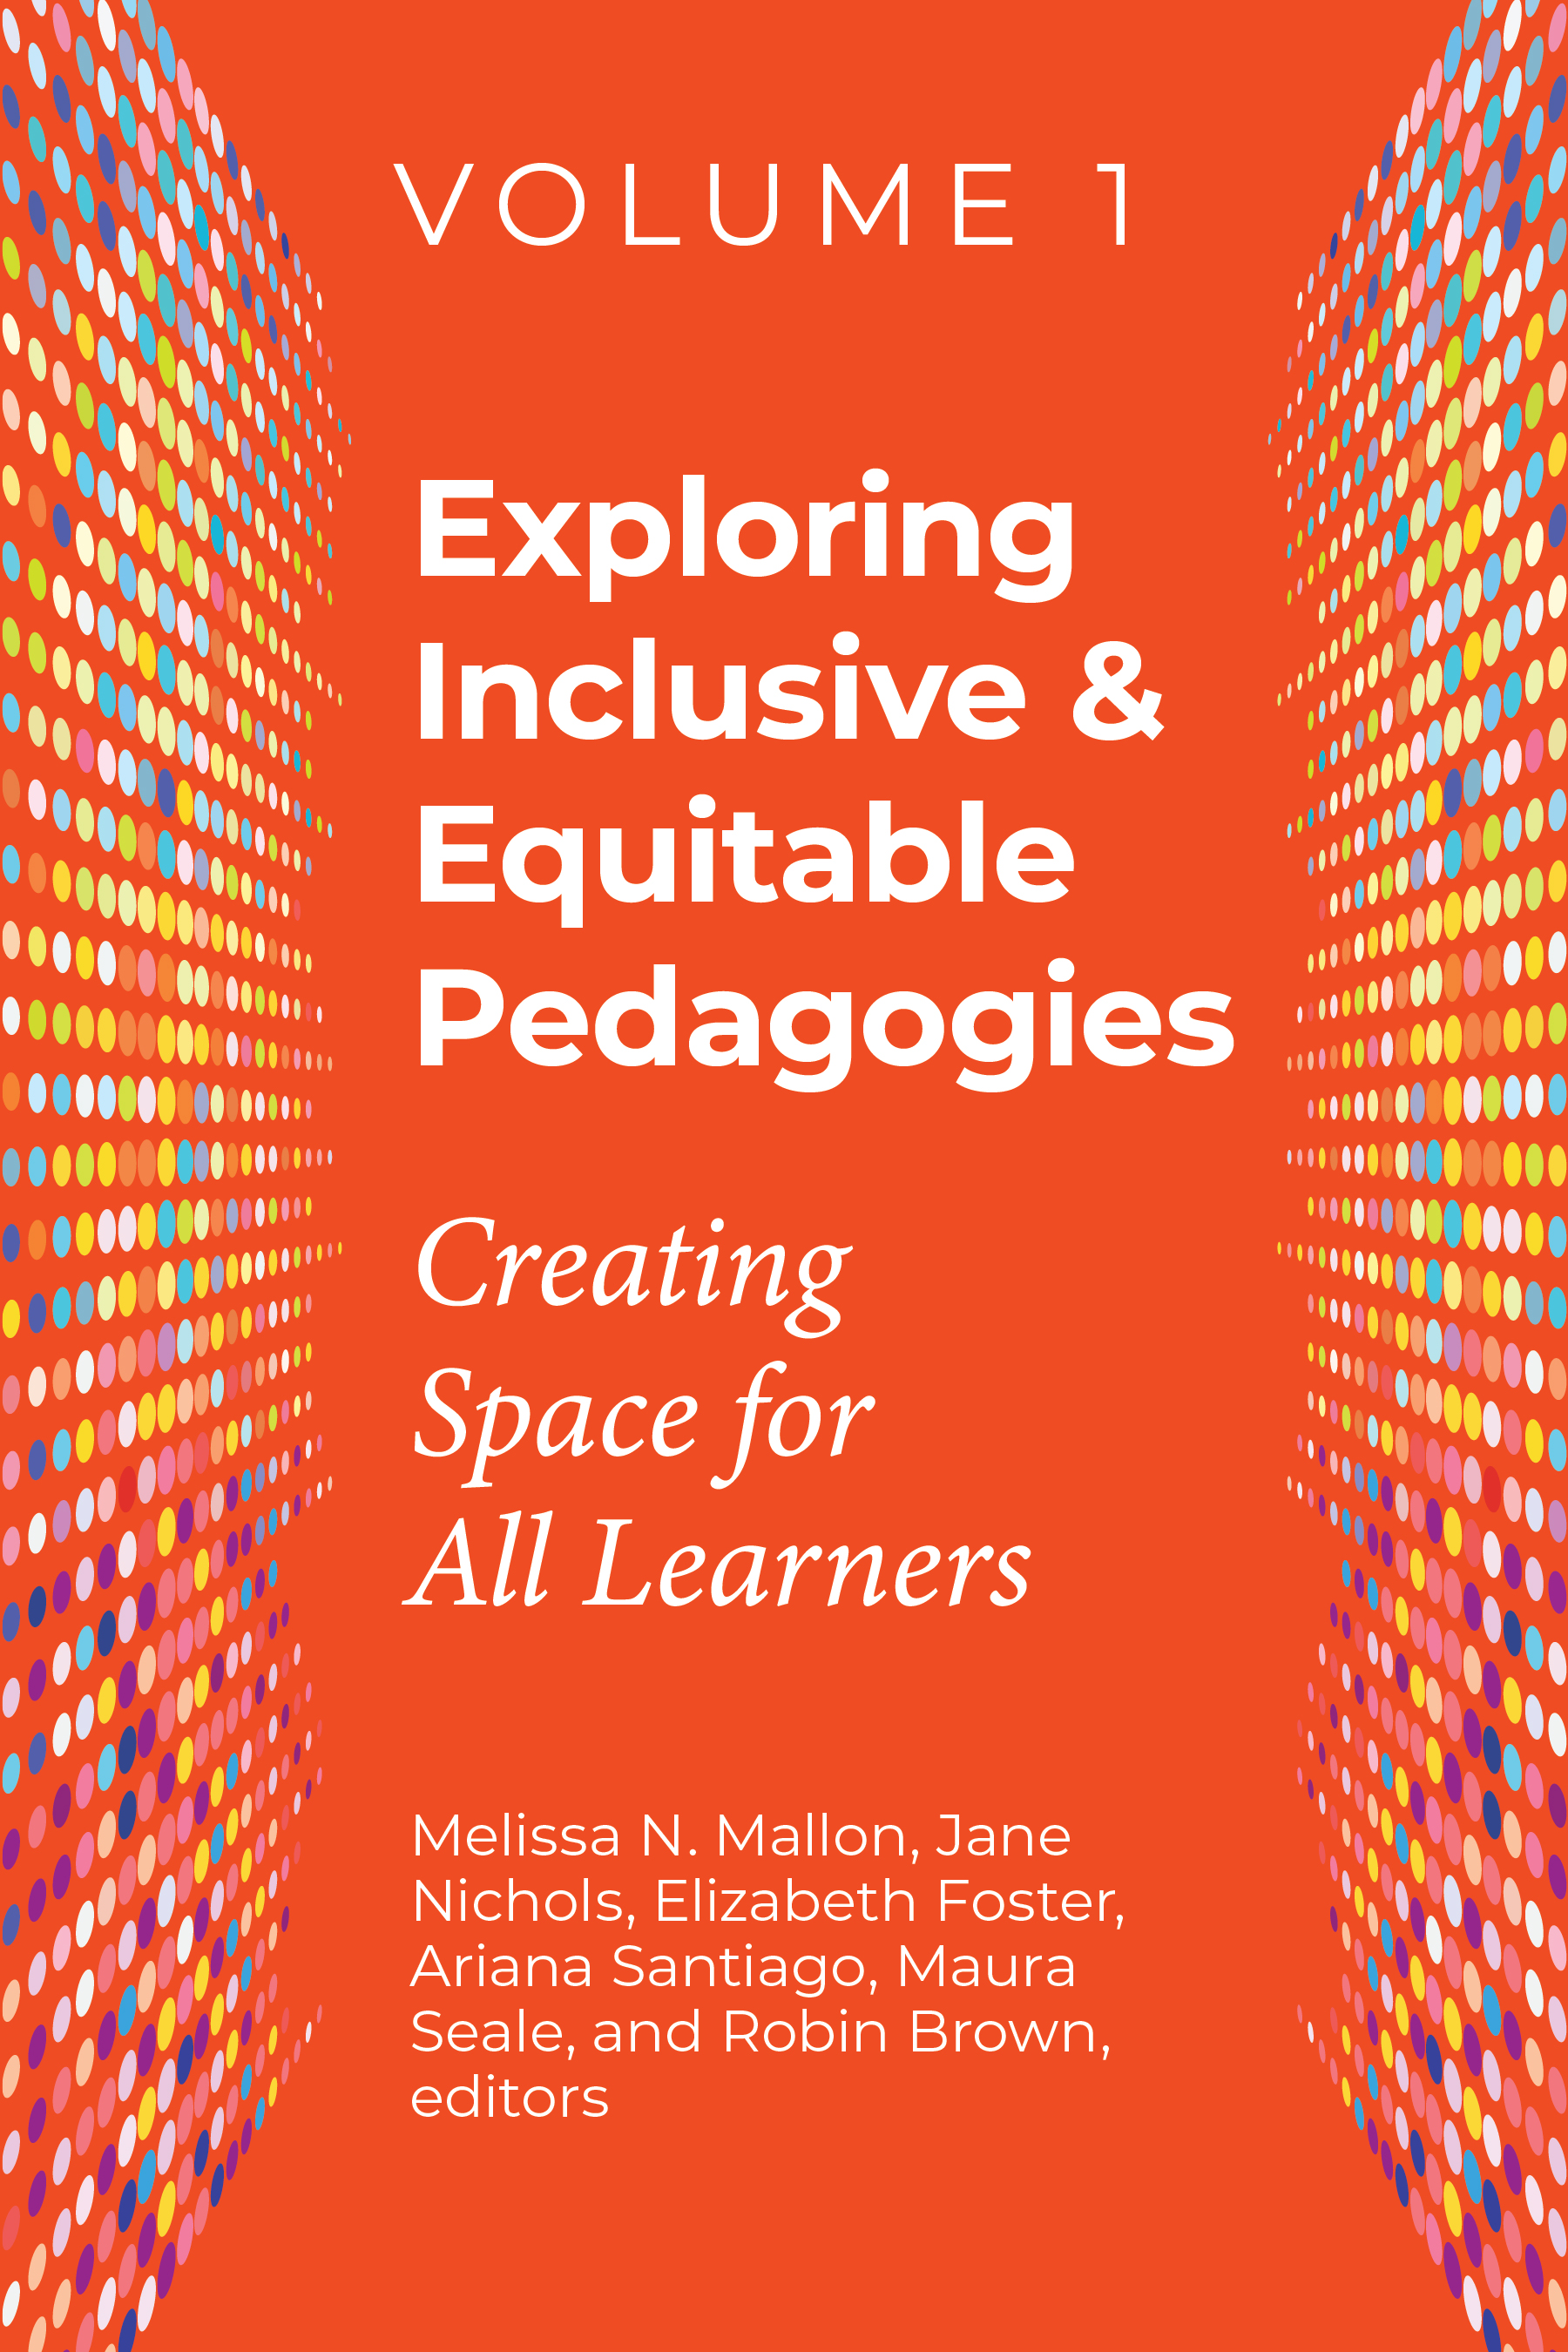 book cover for Exploring Inclusive & Equitable Pedagogies: Creating Space for All Learners, Volume 1